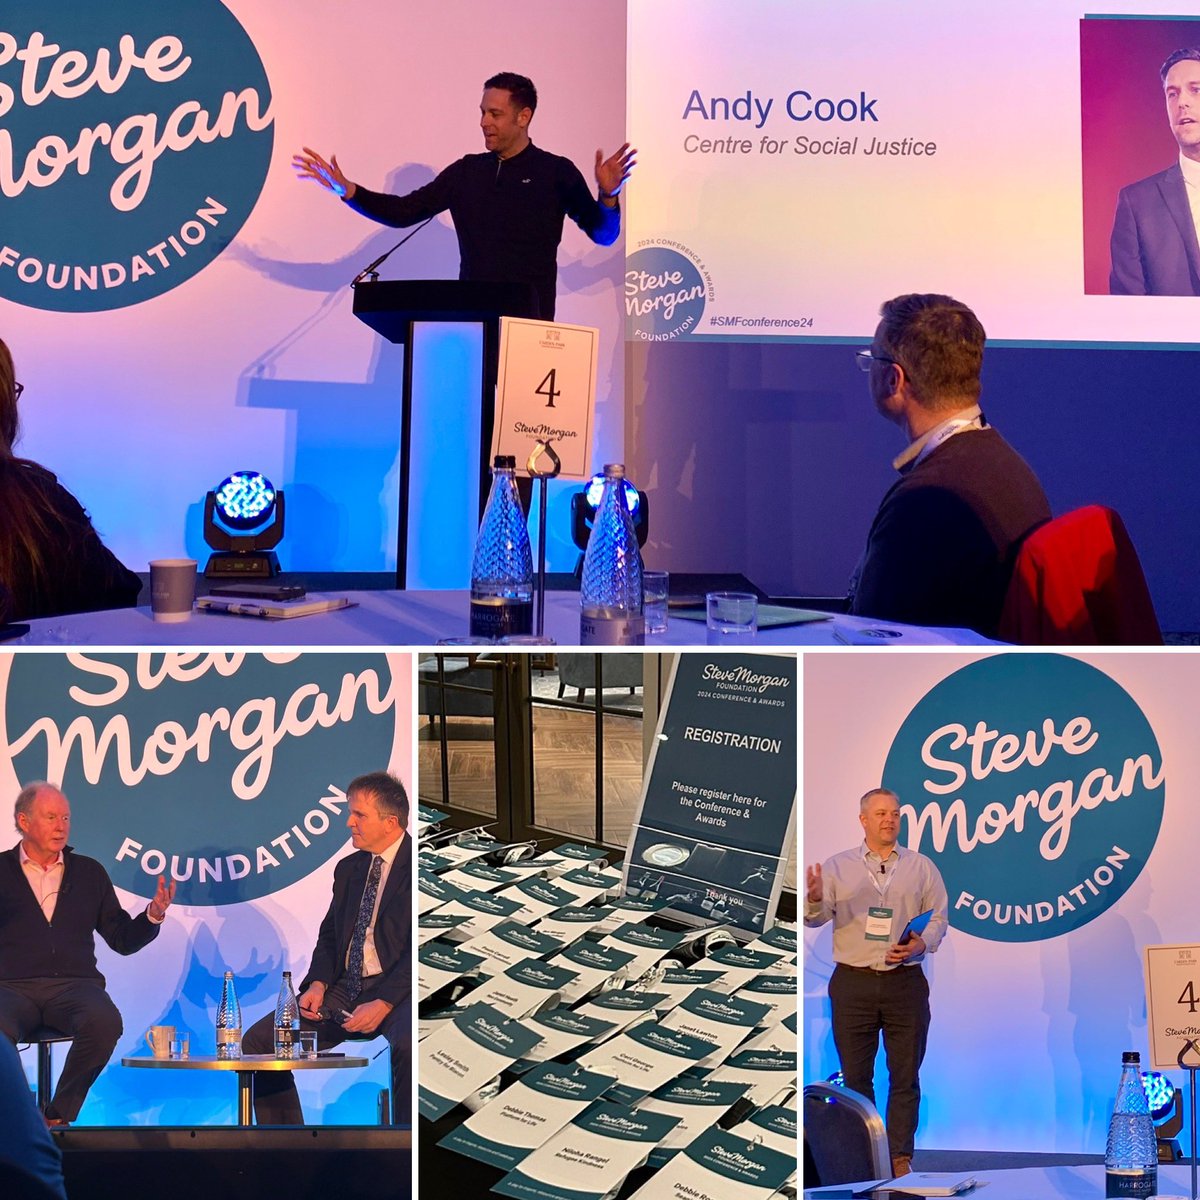 Brilliant day at the #SMFconference24 talking to small charities and learning how the @stevemorganfdn is bringing excellence to philanthropy. Huge thanks to @liameaglestone and team for hosting the day.